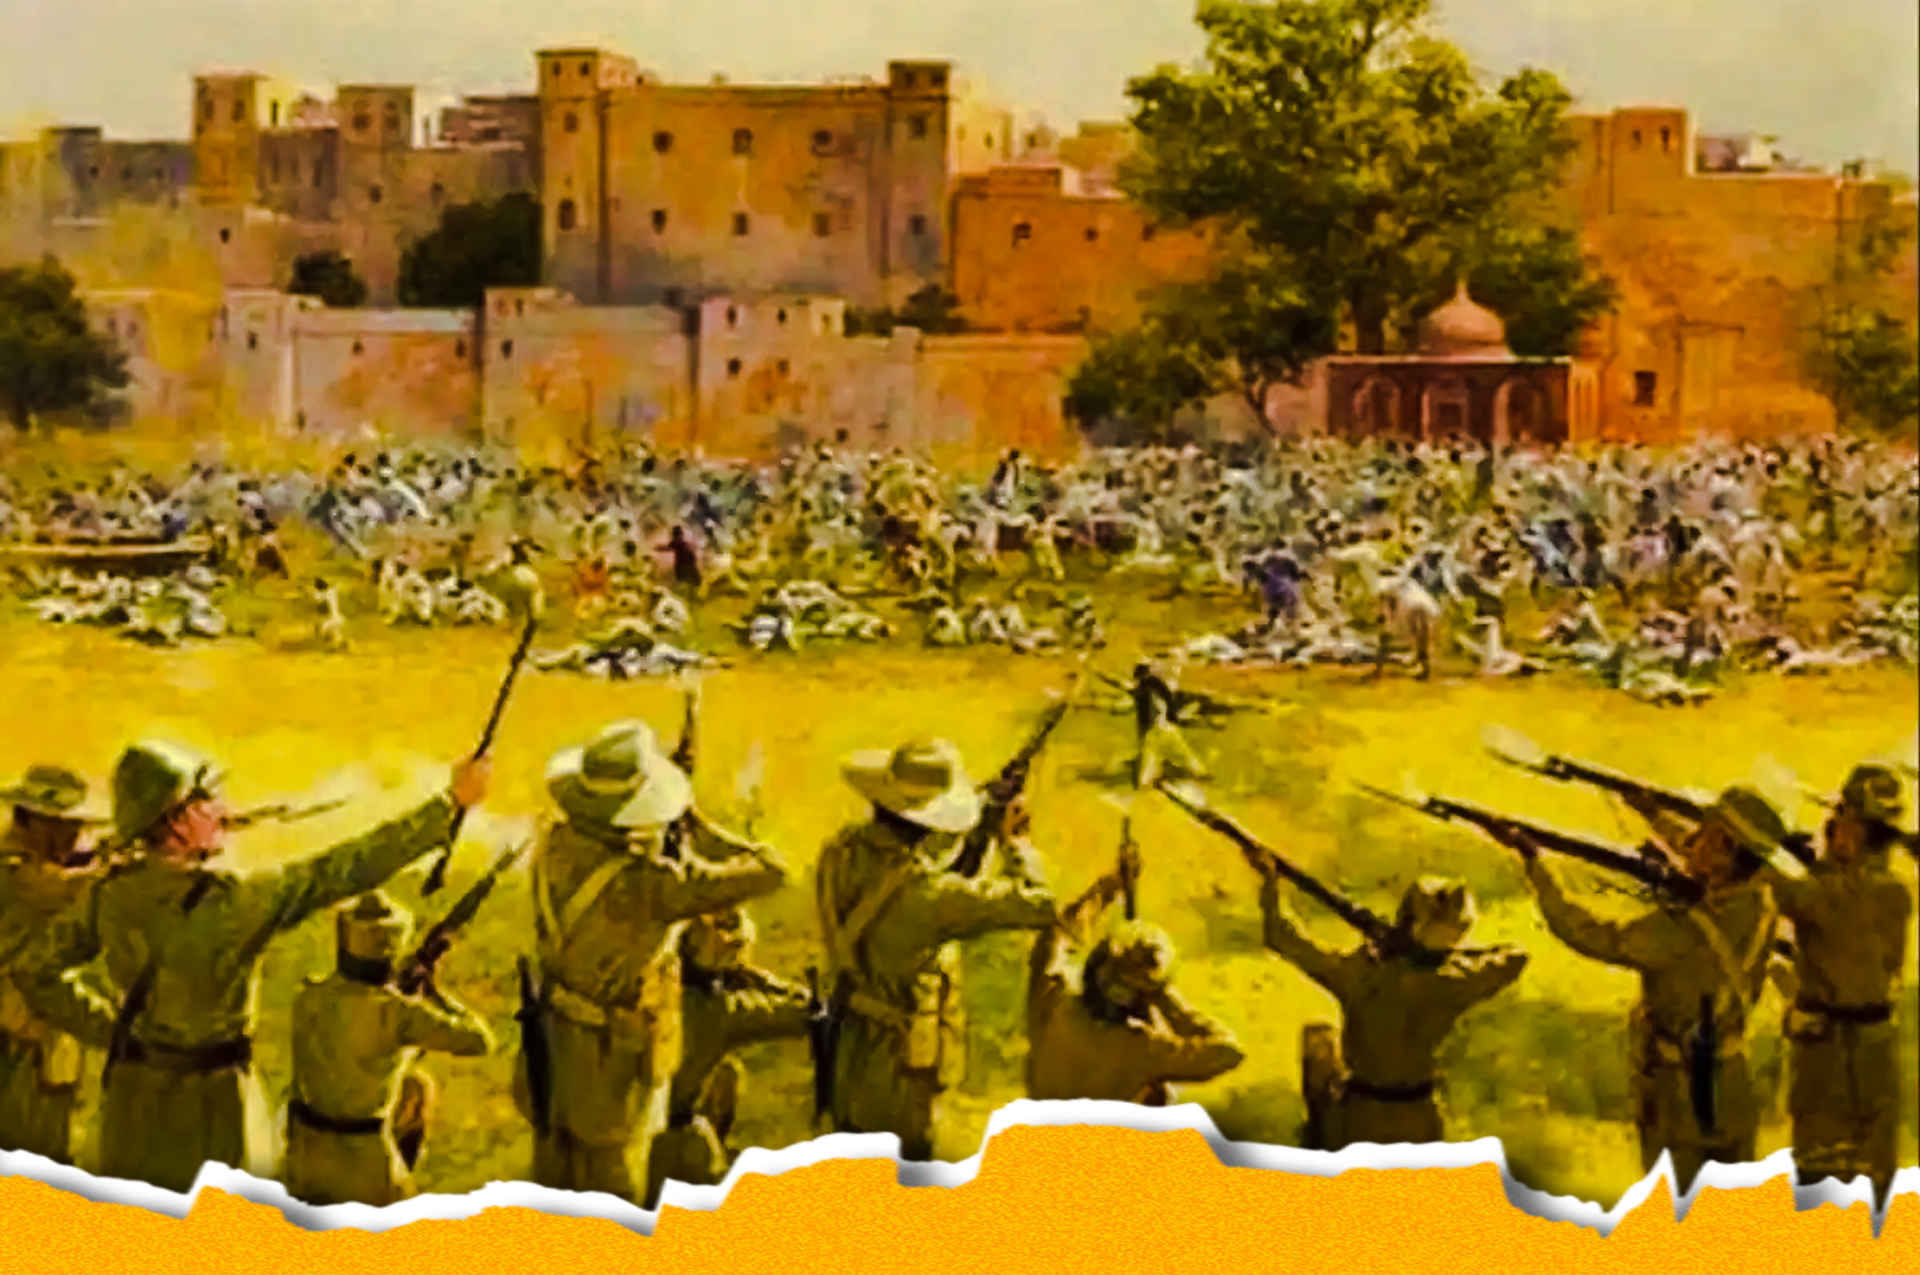 Jallianwala Bagh Massacre - The Crime Which Was Planned Or Random (103 Years Of Tragedy)